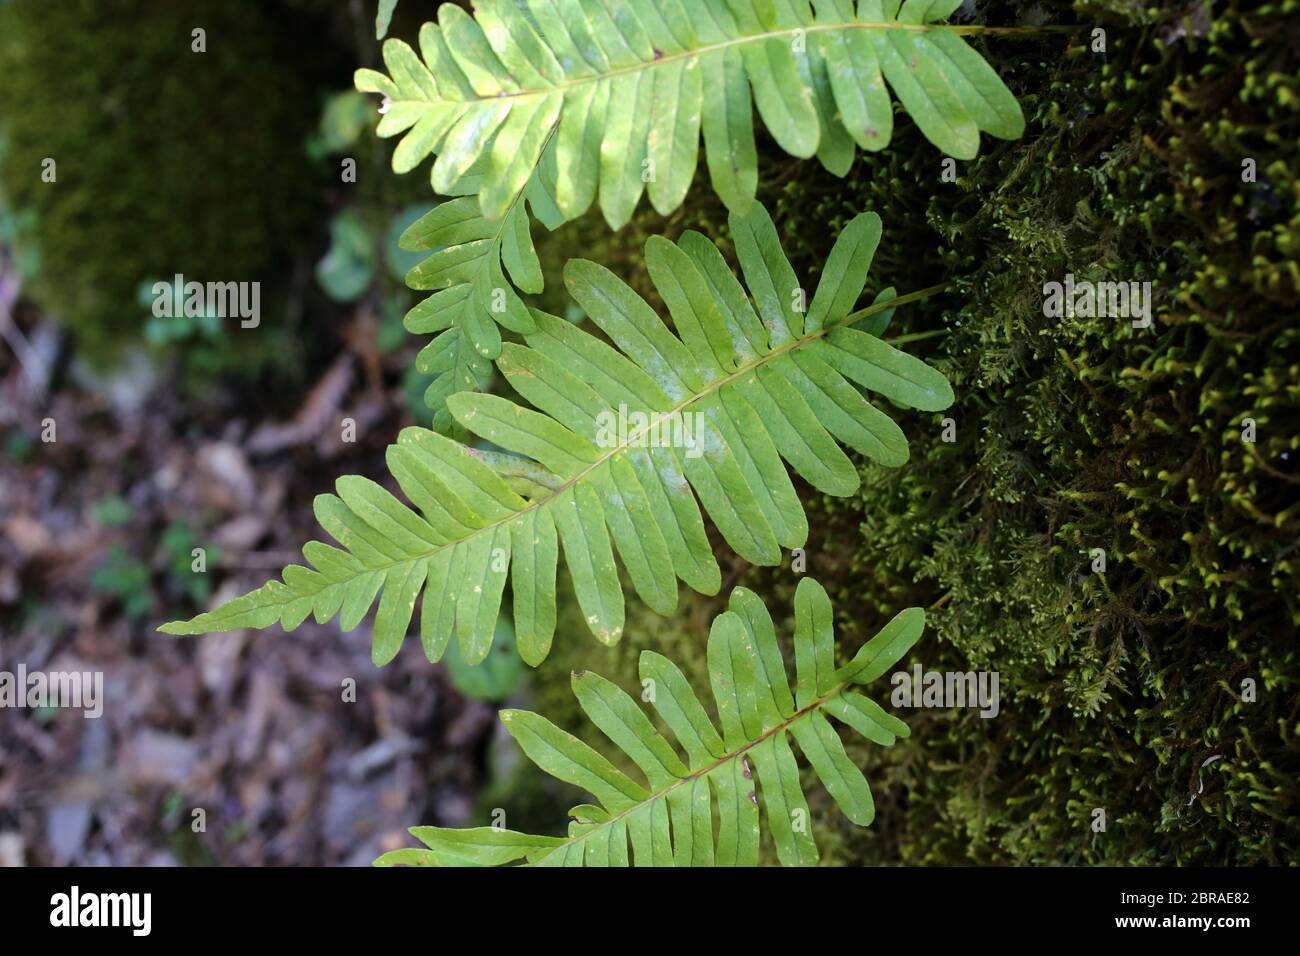 Polypodium vulgare, Polypody. Wild plant shot in the spring. Stock Photo